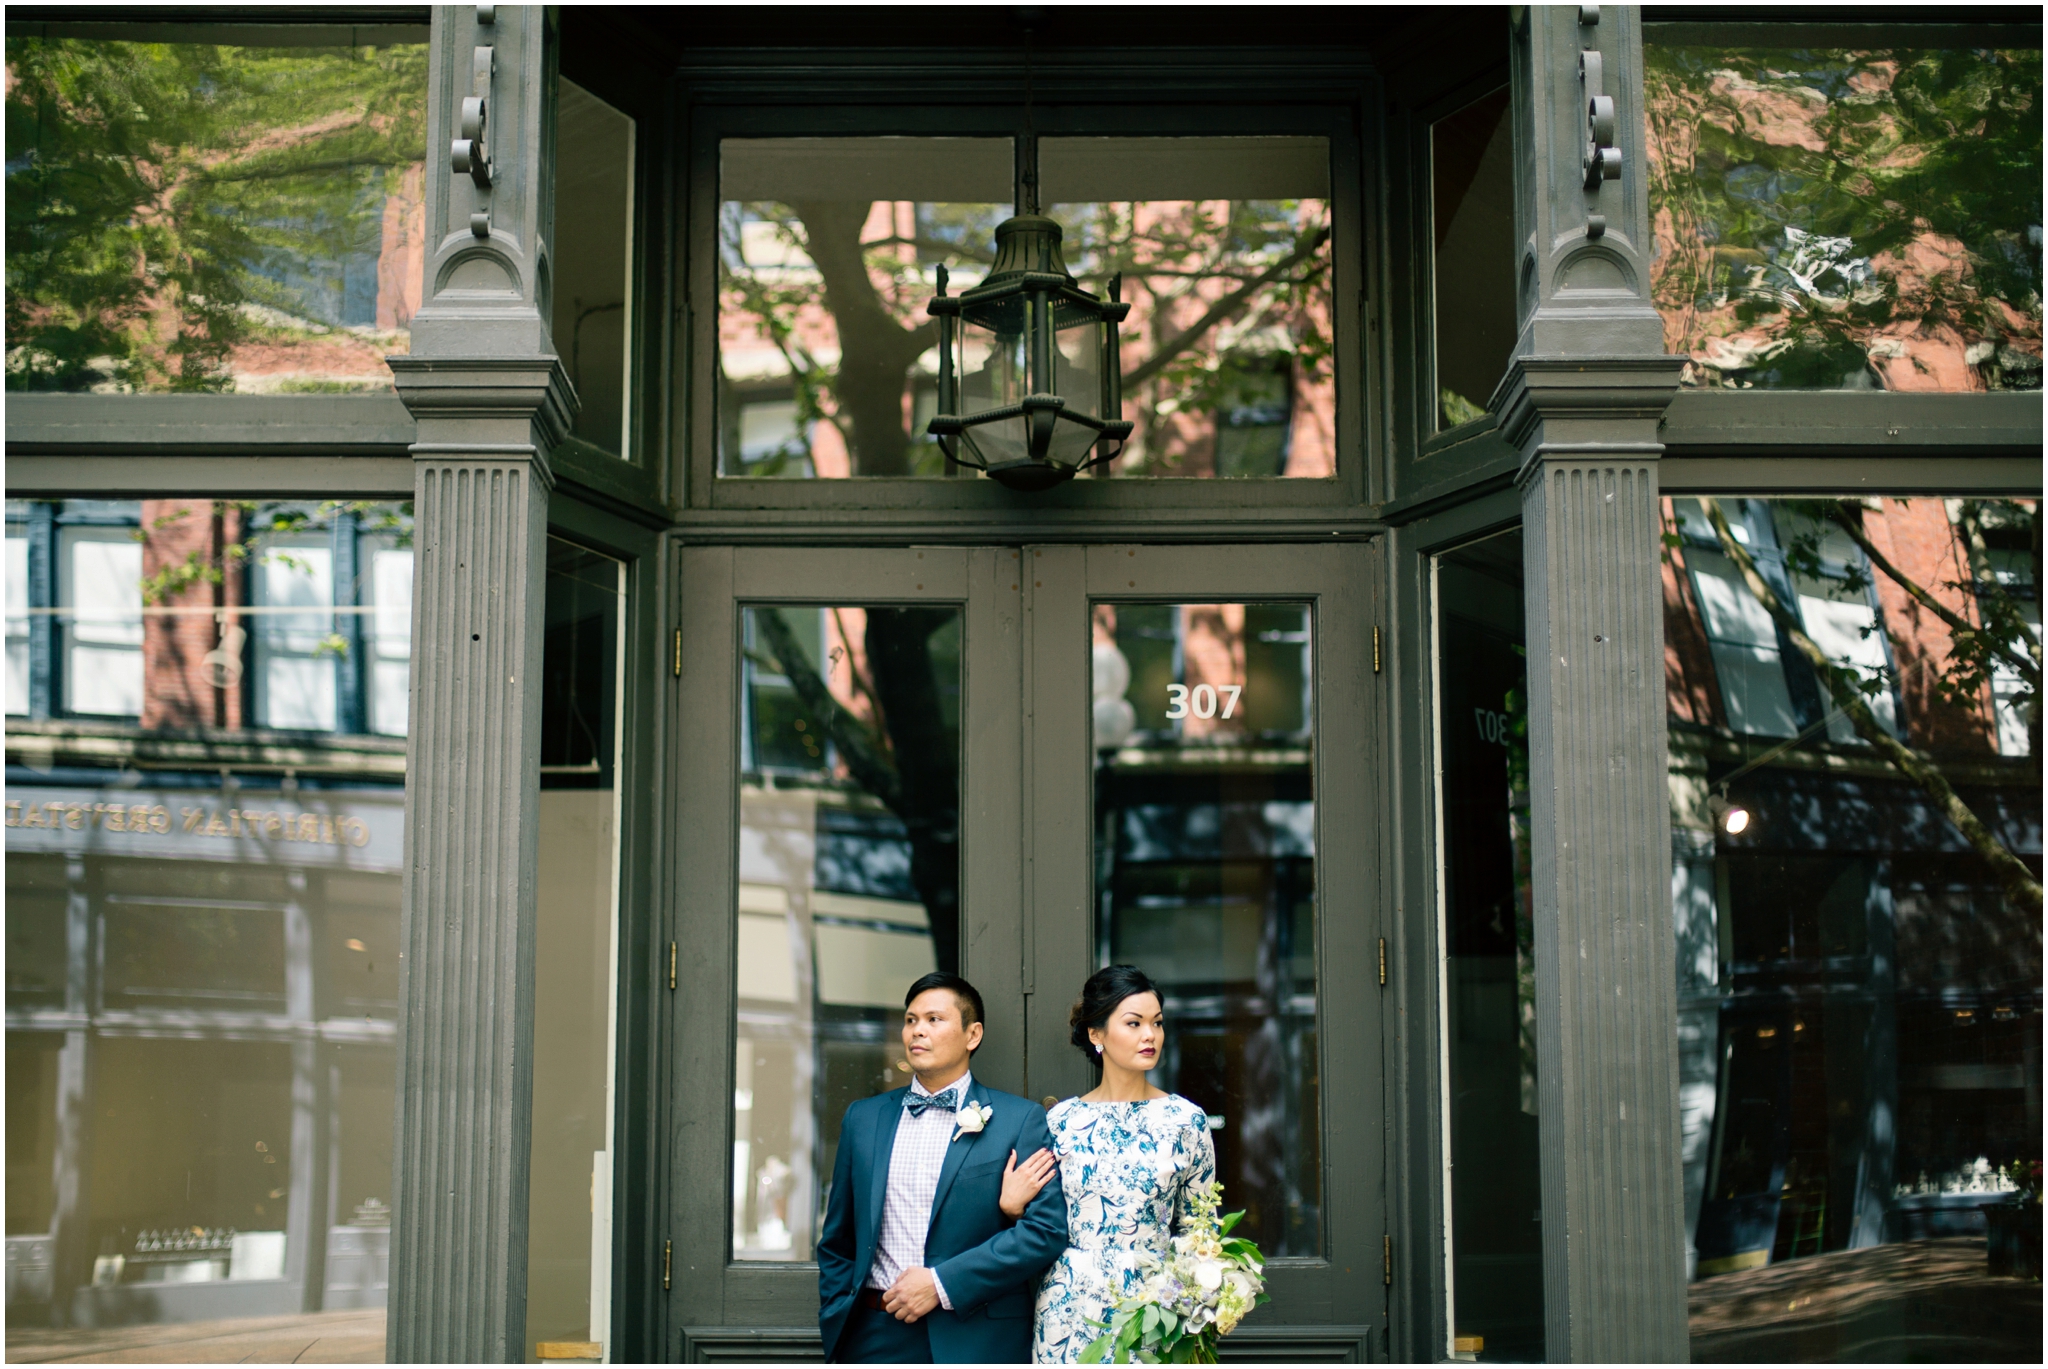 1-Bride-Groom-Romantic-Editorial-Portraits-Occidental-Park-Pioneer-Square-Seattle-Wedding-Day-Photographer-Photography-by-Betty-Elaine